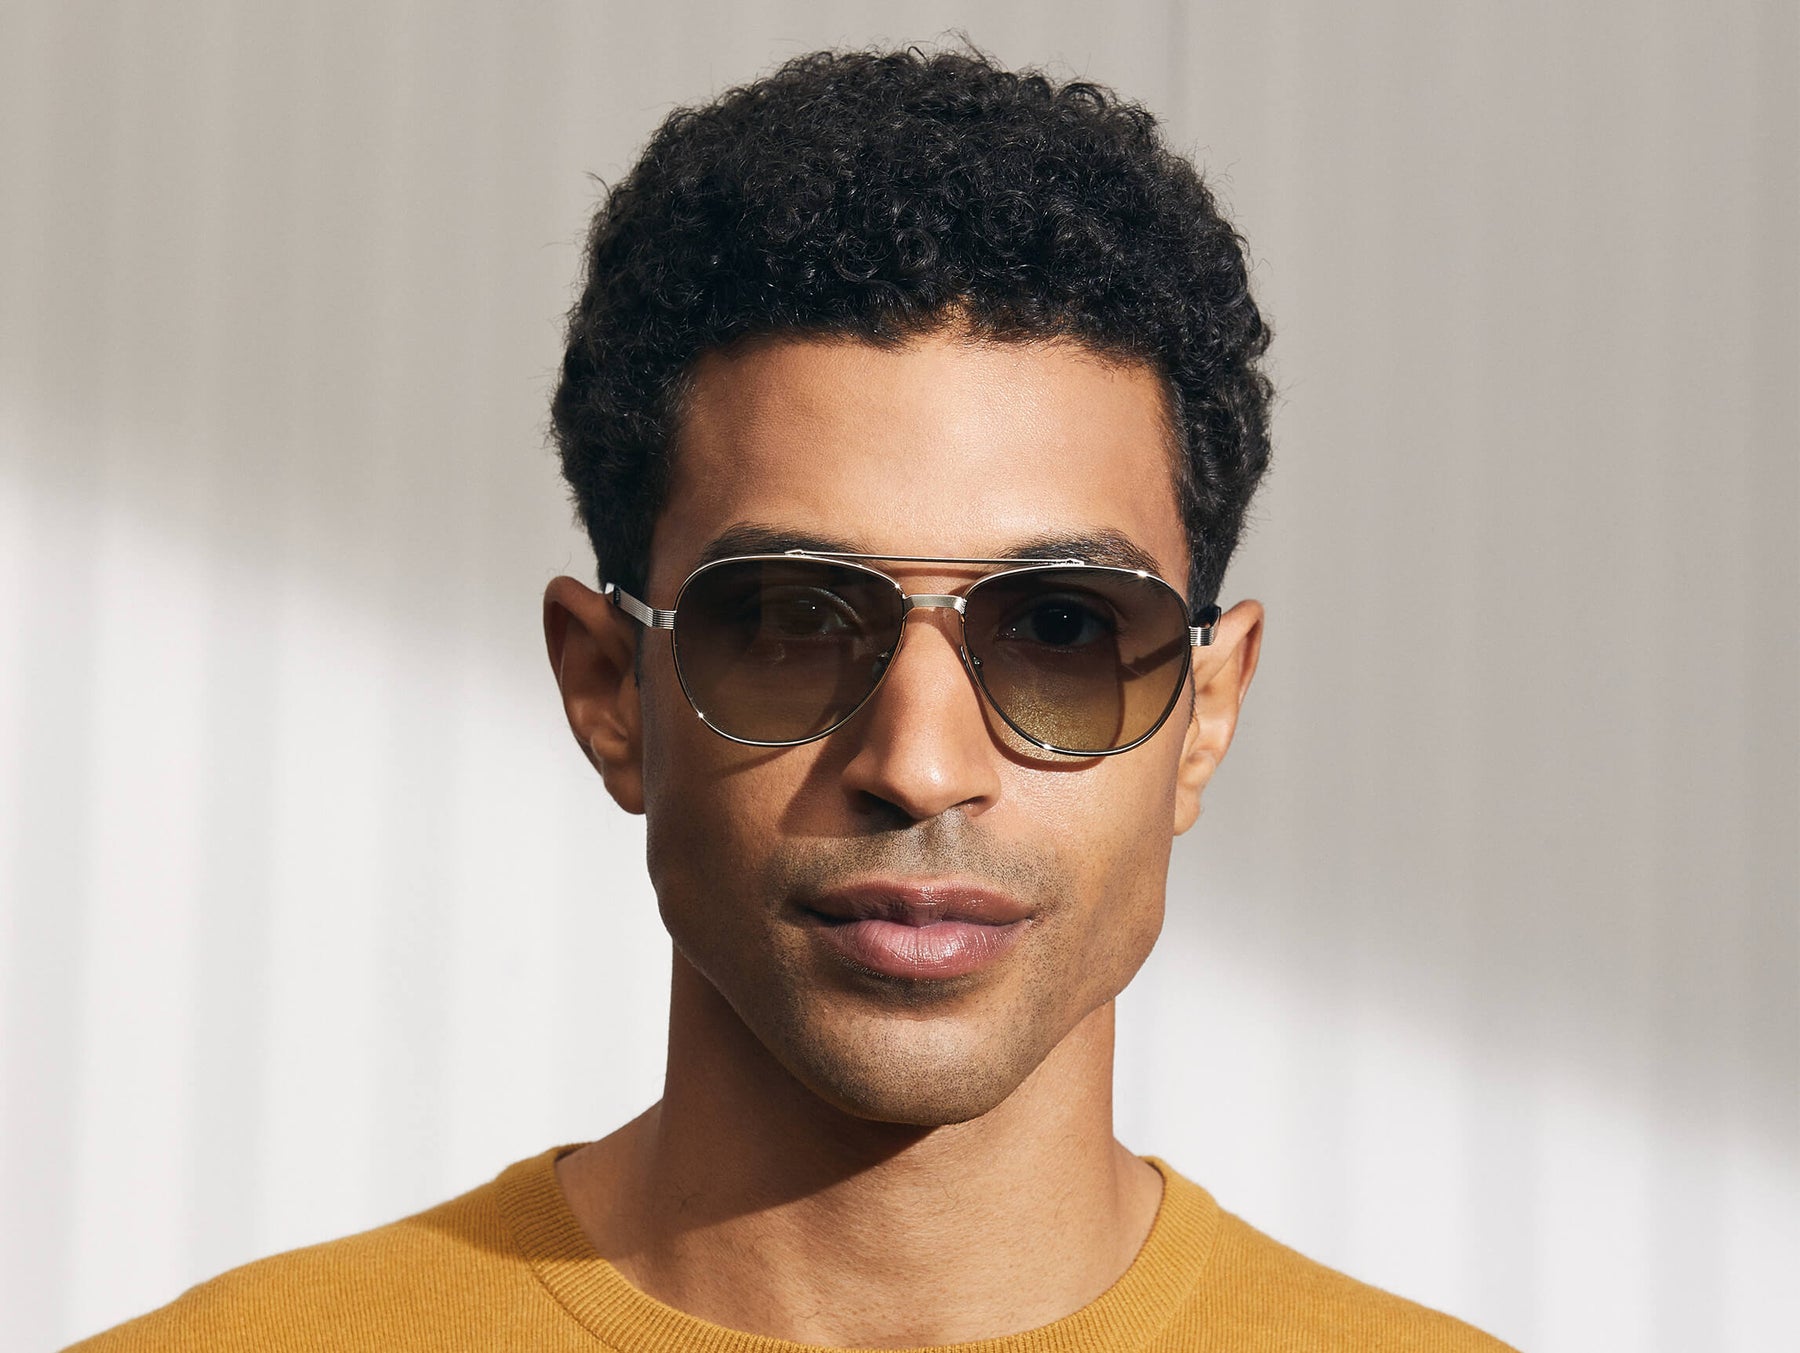 Model is wearing The SHAV SUN in Silver in size 59 with Forest Wood Tinted Lenses